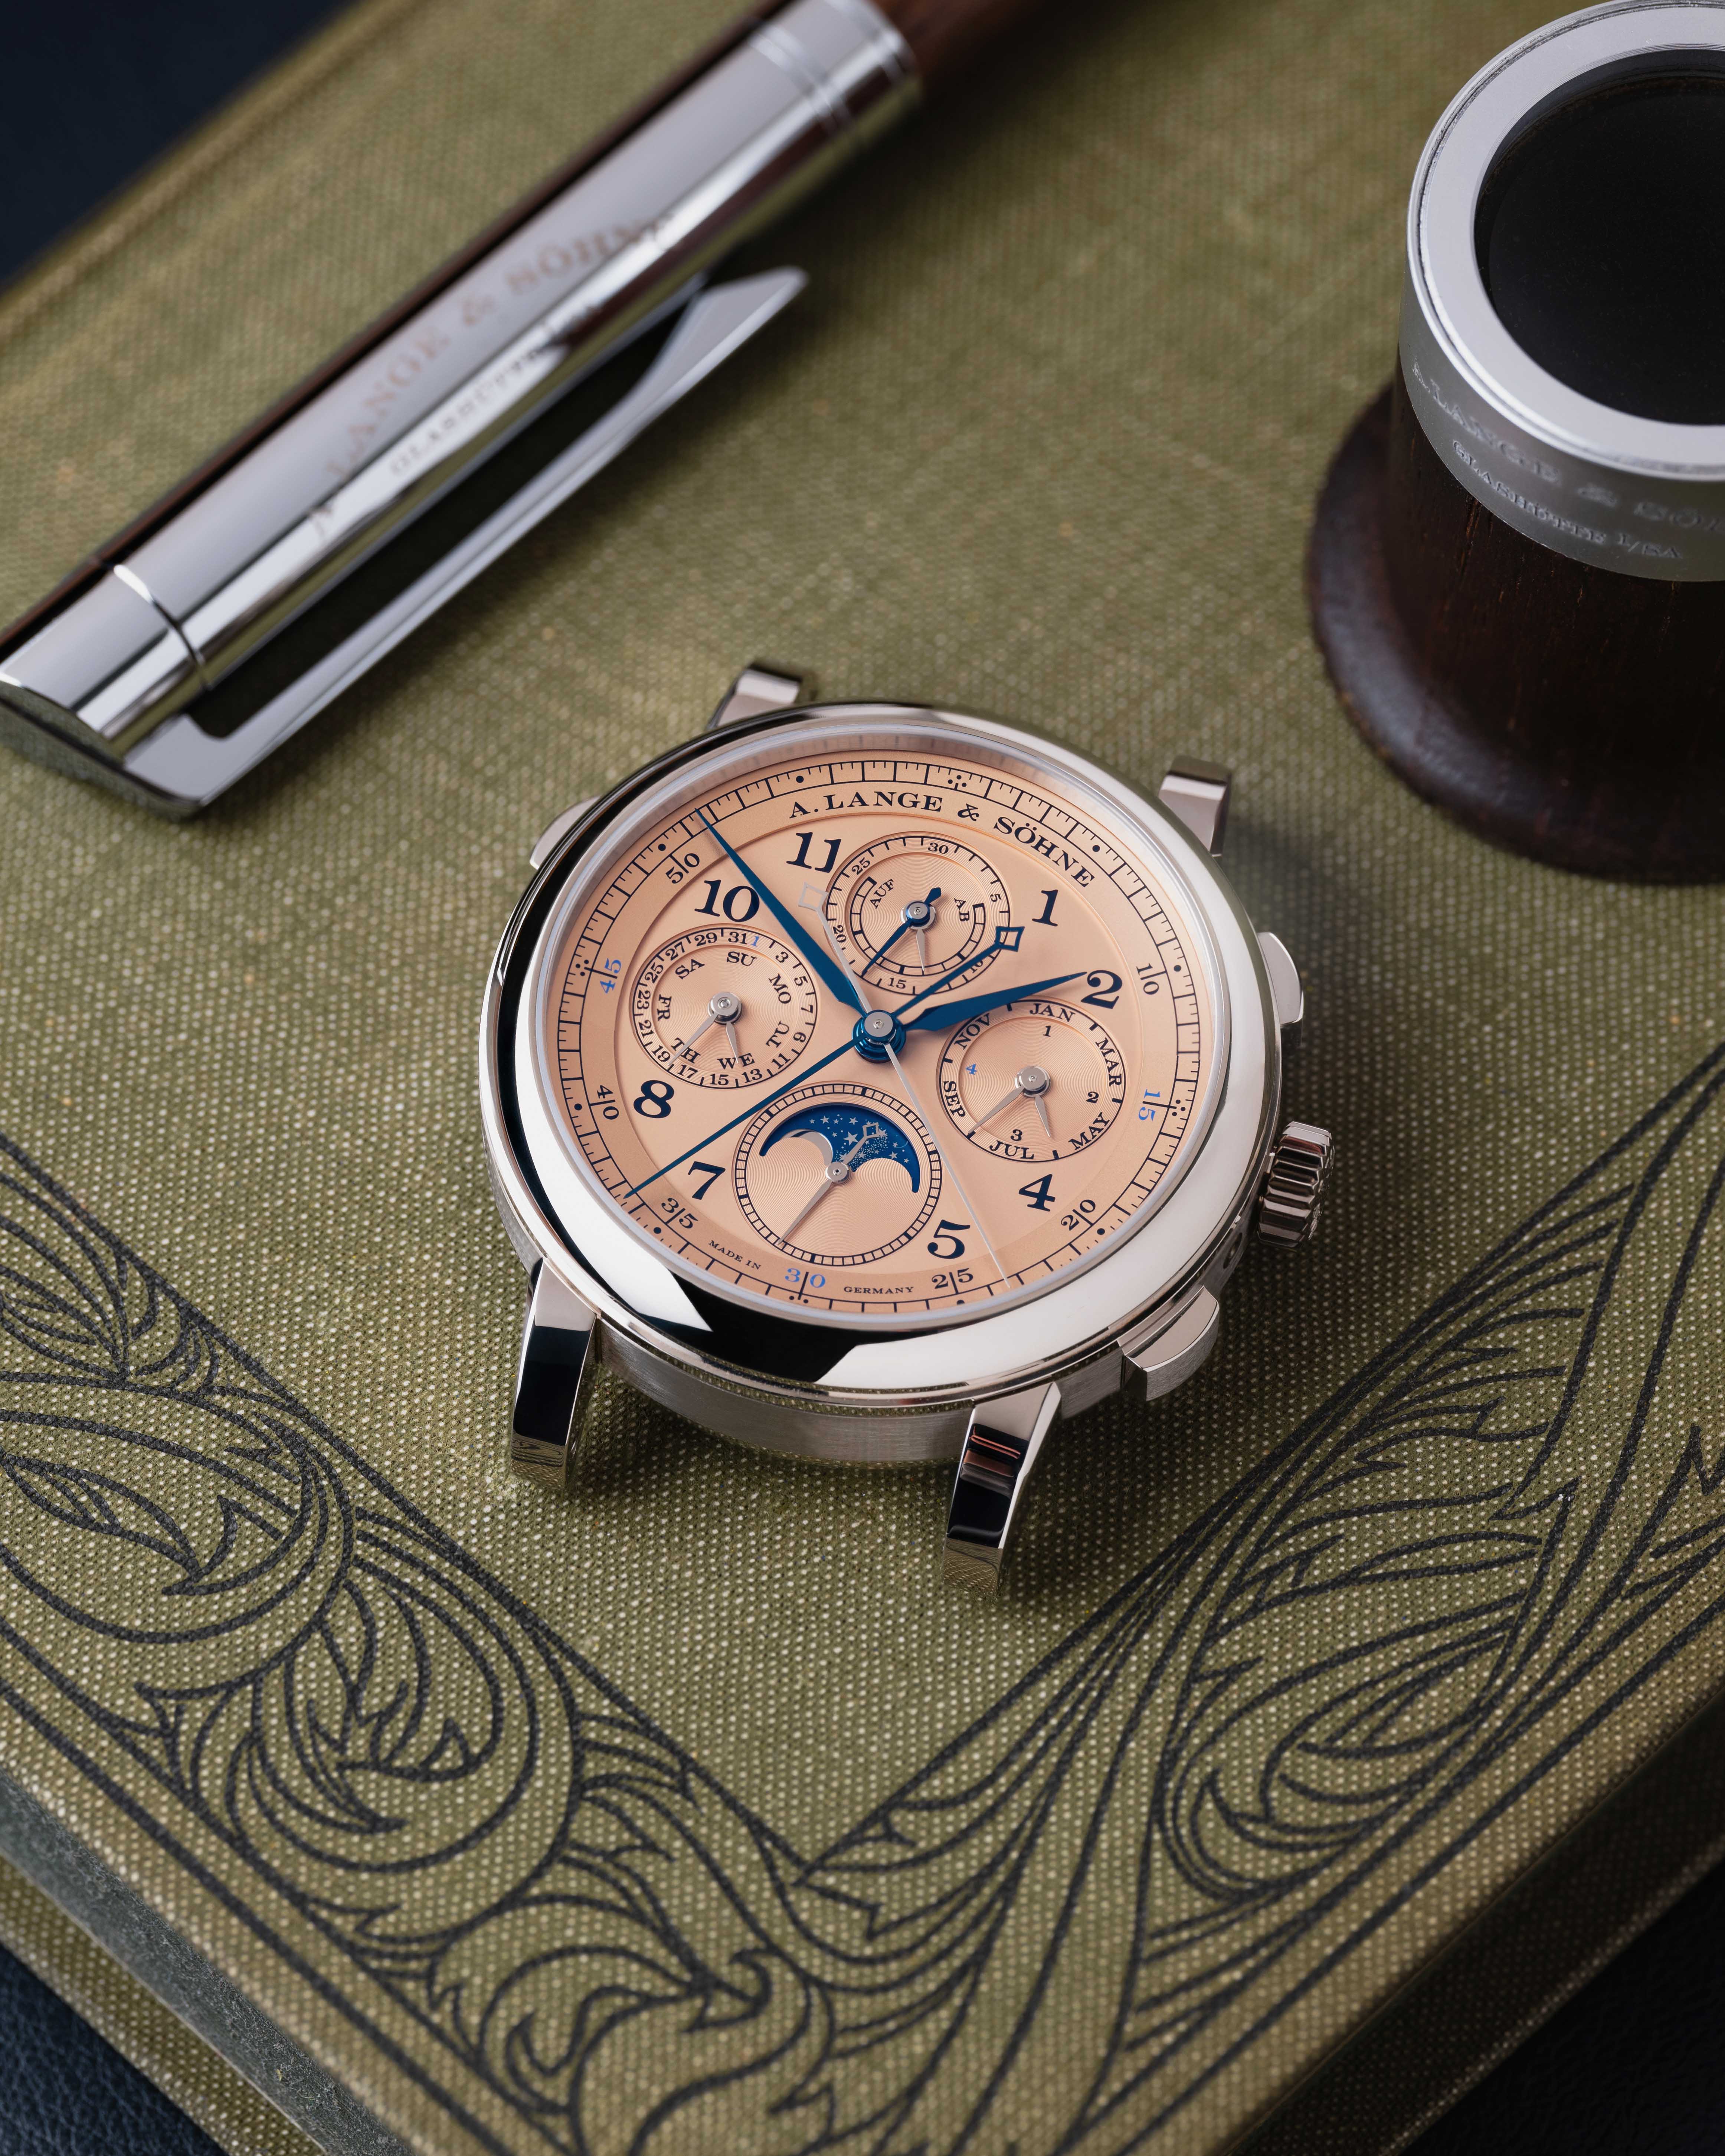 Product Highlight: A. Lange & Söhne 1815 Rattrapante Perpetual Calendar